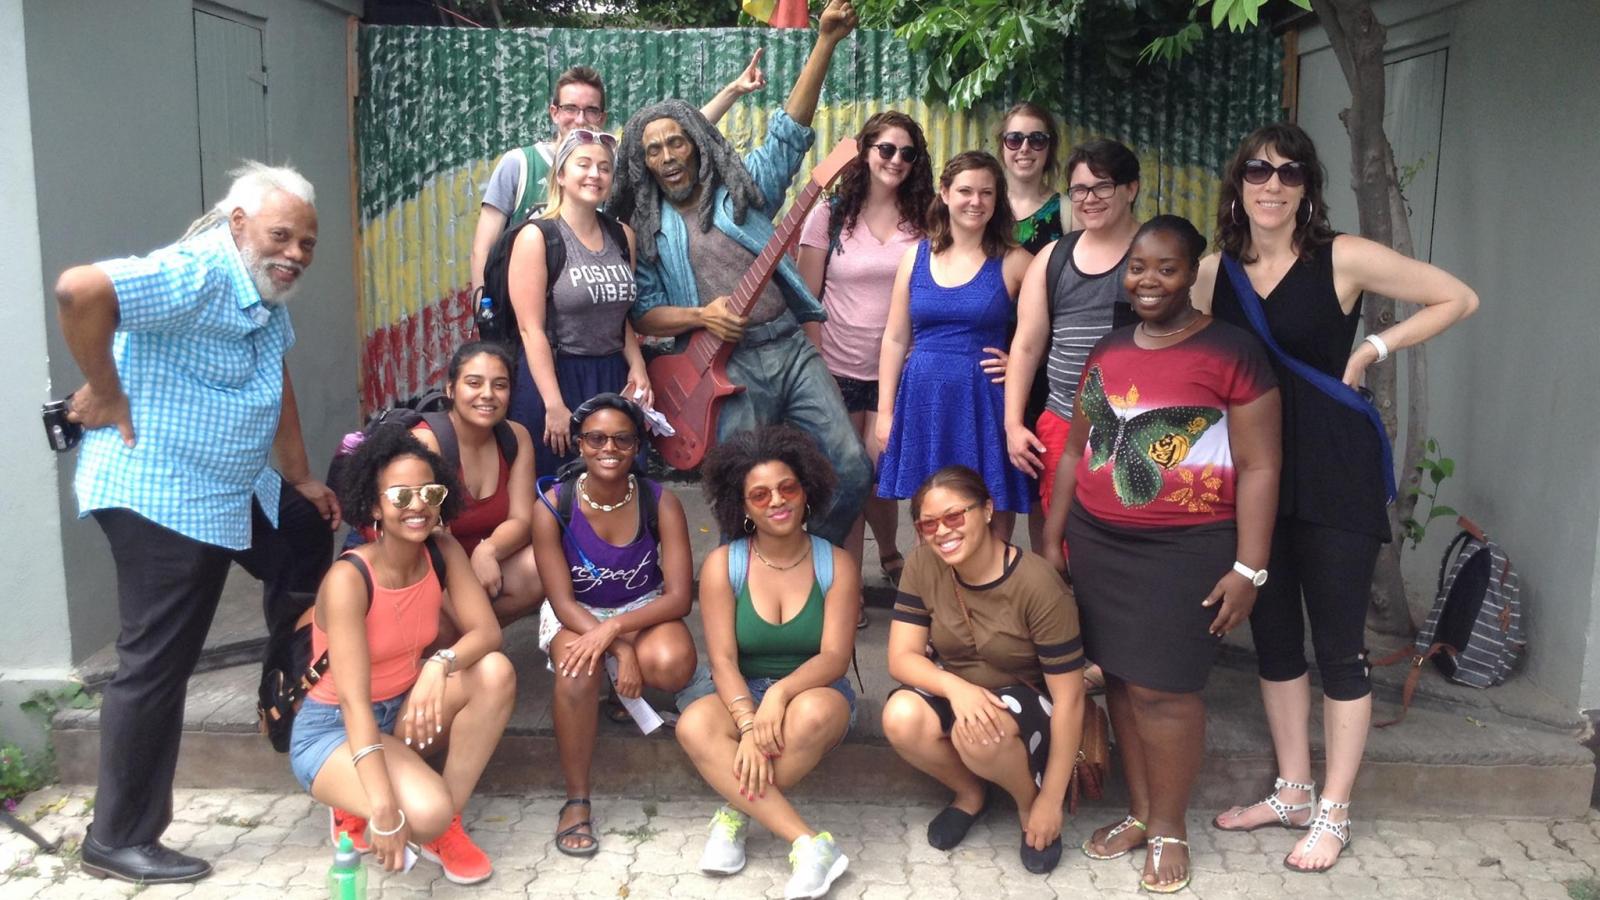 ARTEDUC 5797.02 Exploring Jamaican Arts and Culture study abroad students pose with reggae musician and music educator Michael "Ibo" Cooper (left) at Trench Town Culture Yard, Kingston, Jamaica.